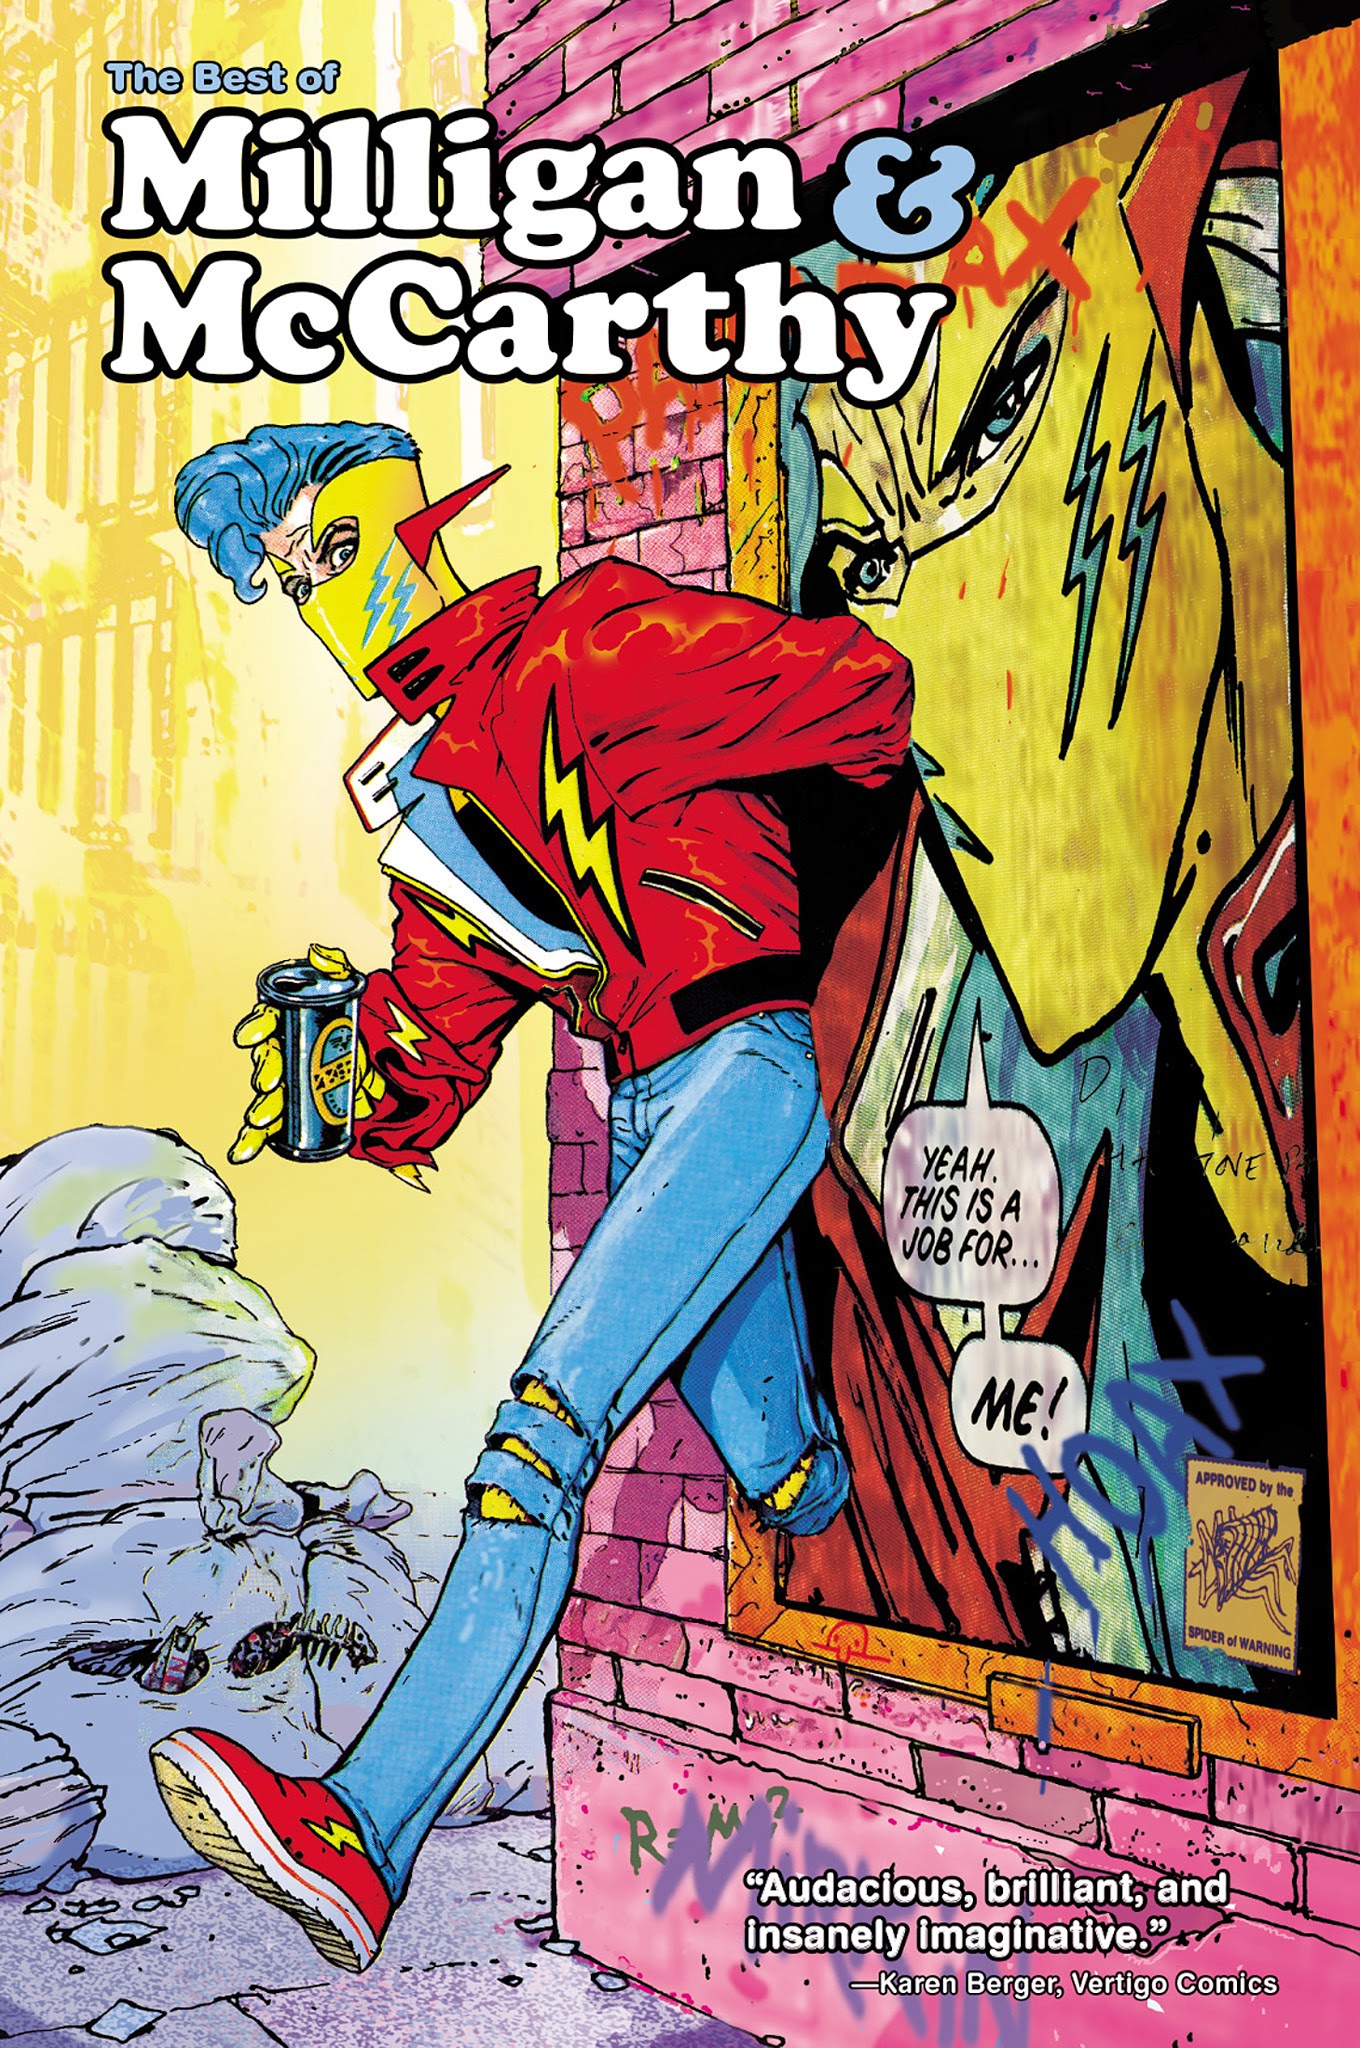 Read online The Best of Milligan & McCarthy comic -  Issue # TPB - 1